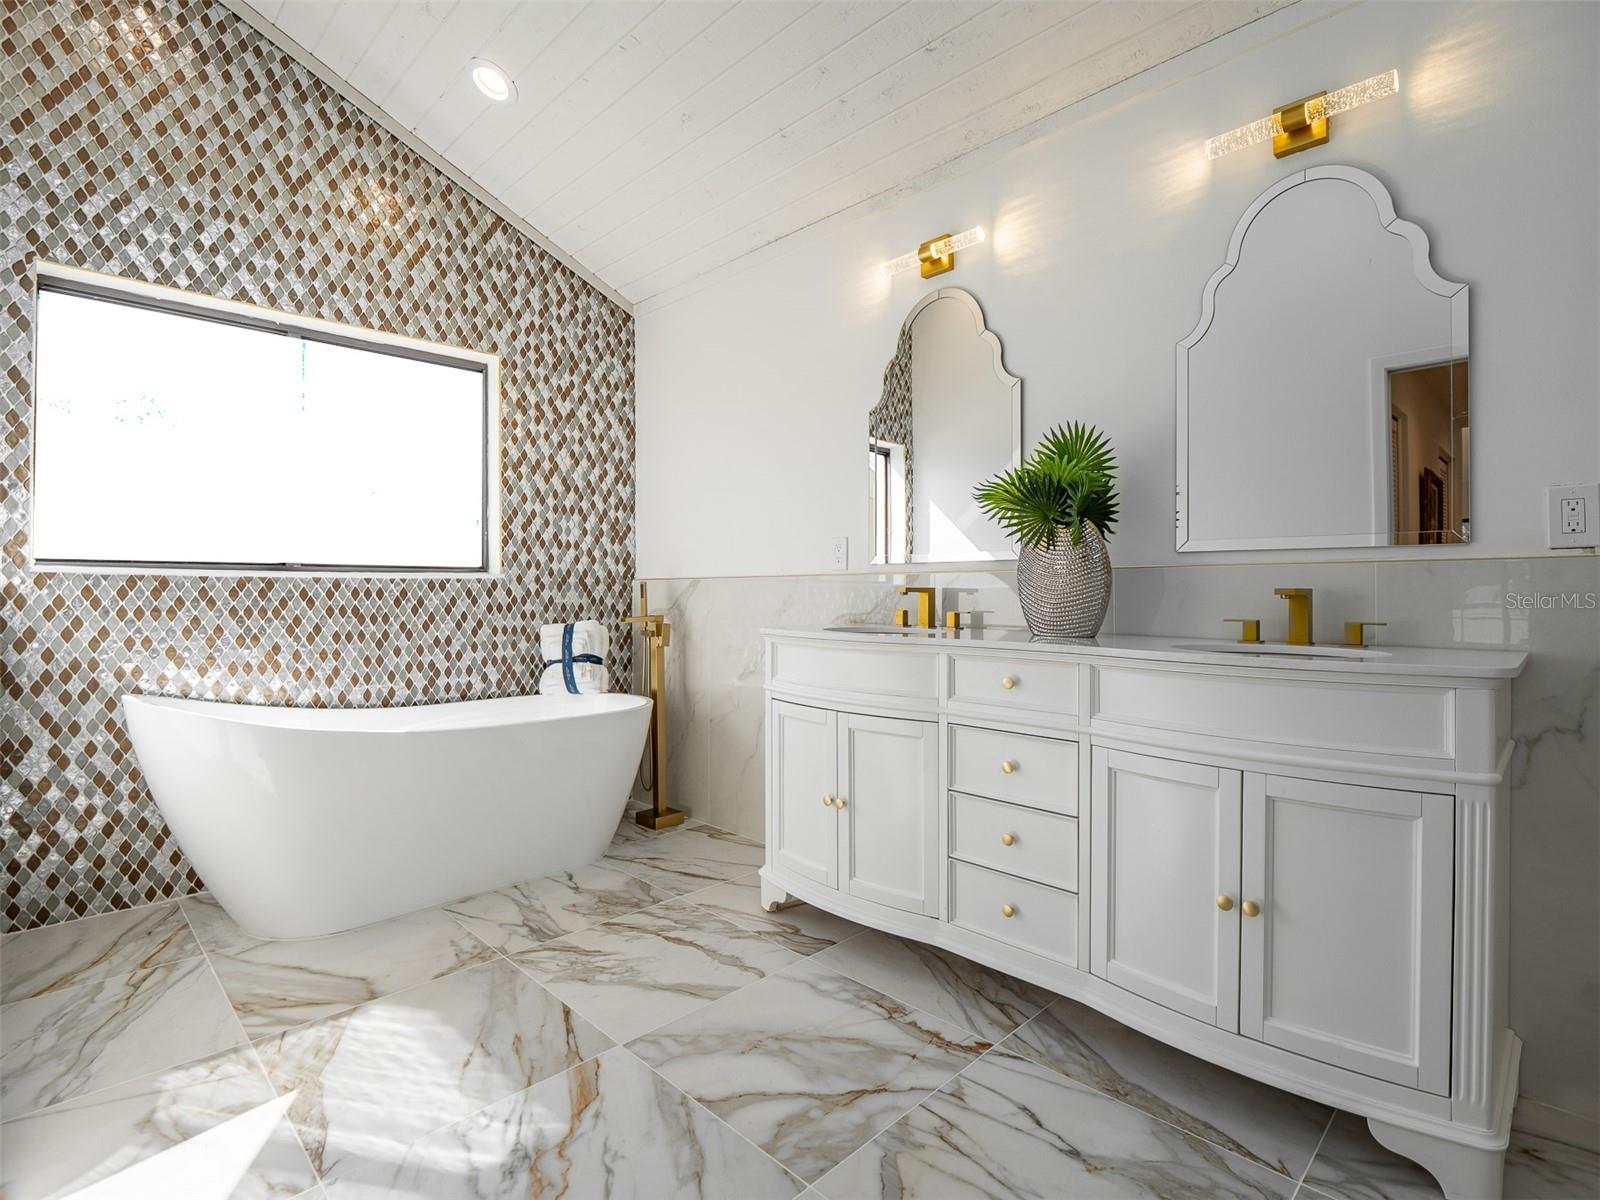 Primary Suite Bathroom with Standalone bath